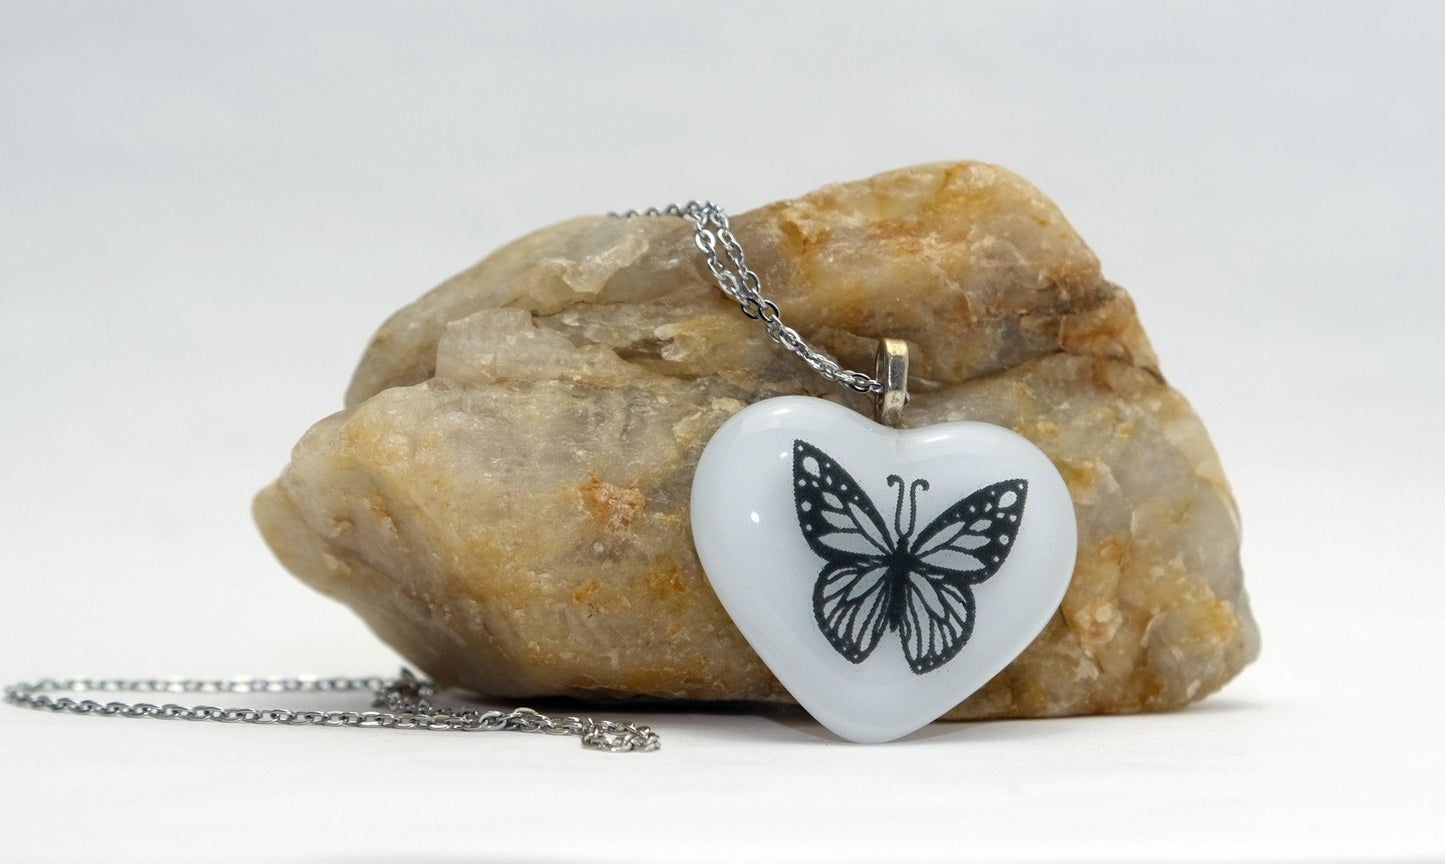 White fused glass heart with Black Butterfly on 18 inch black cord or 20 inch steel chain pendant necklace jewelry